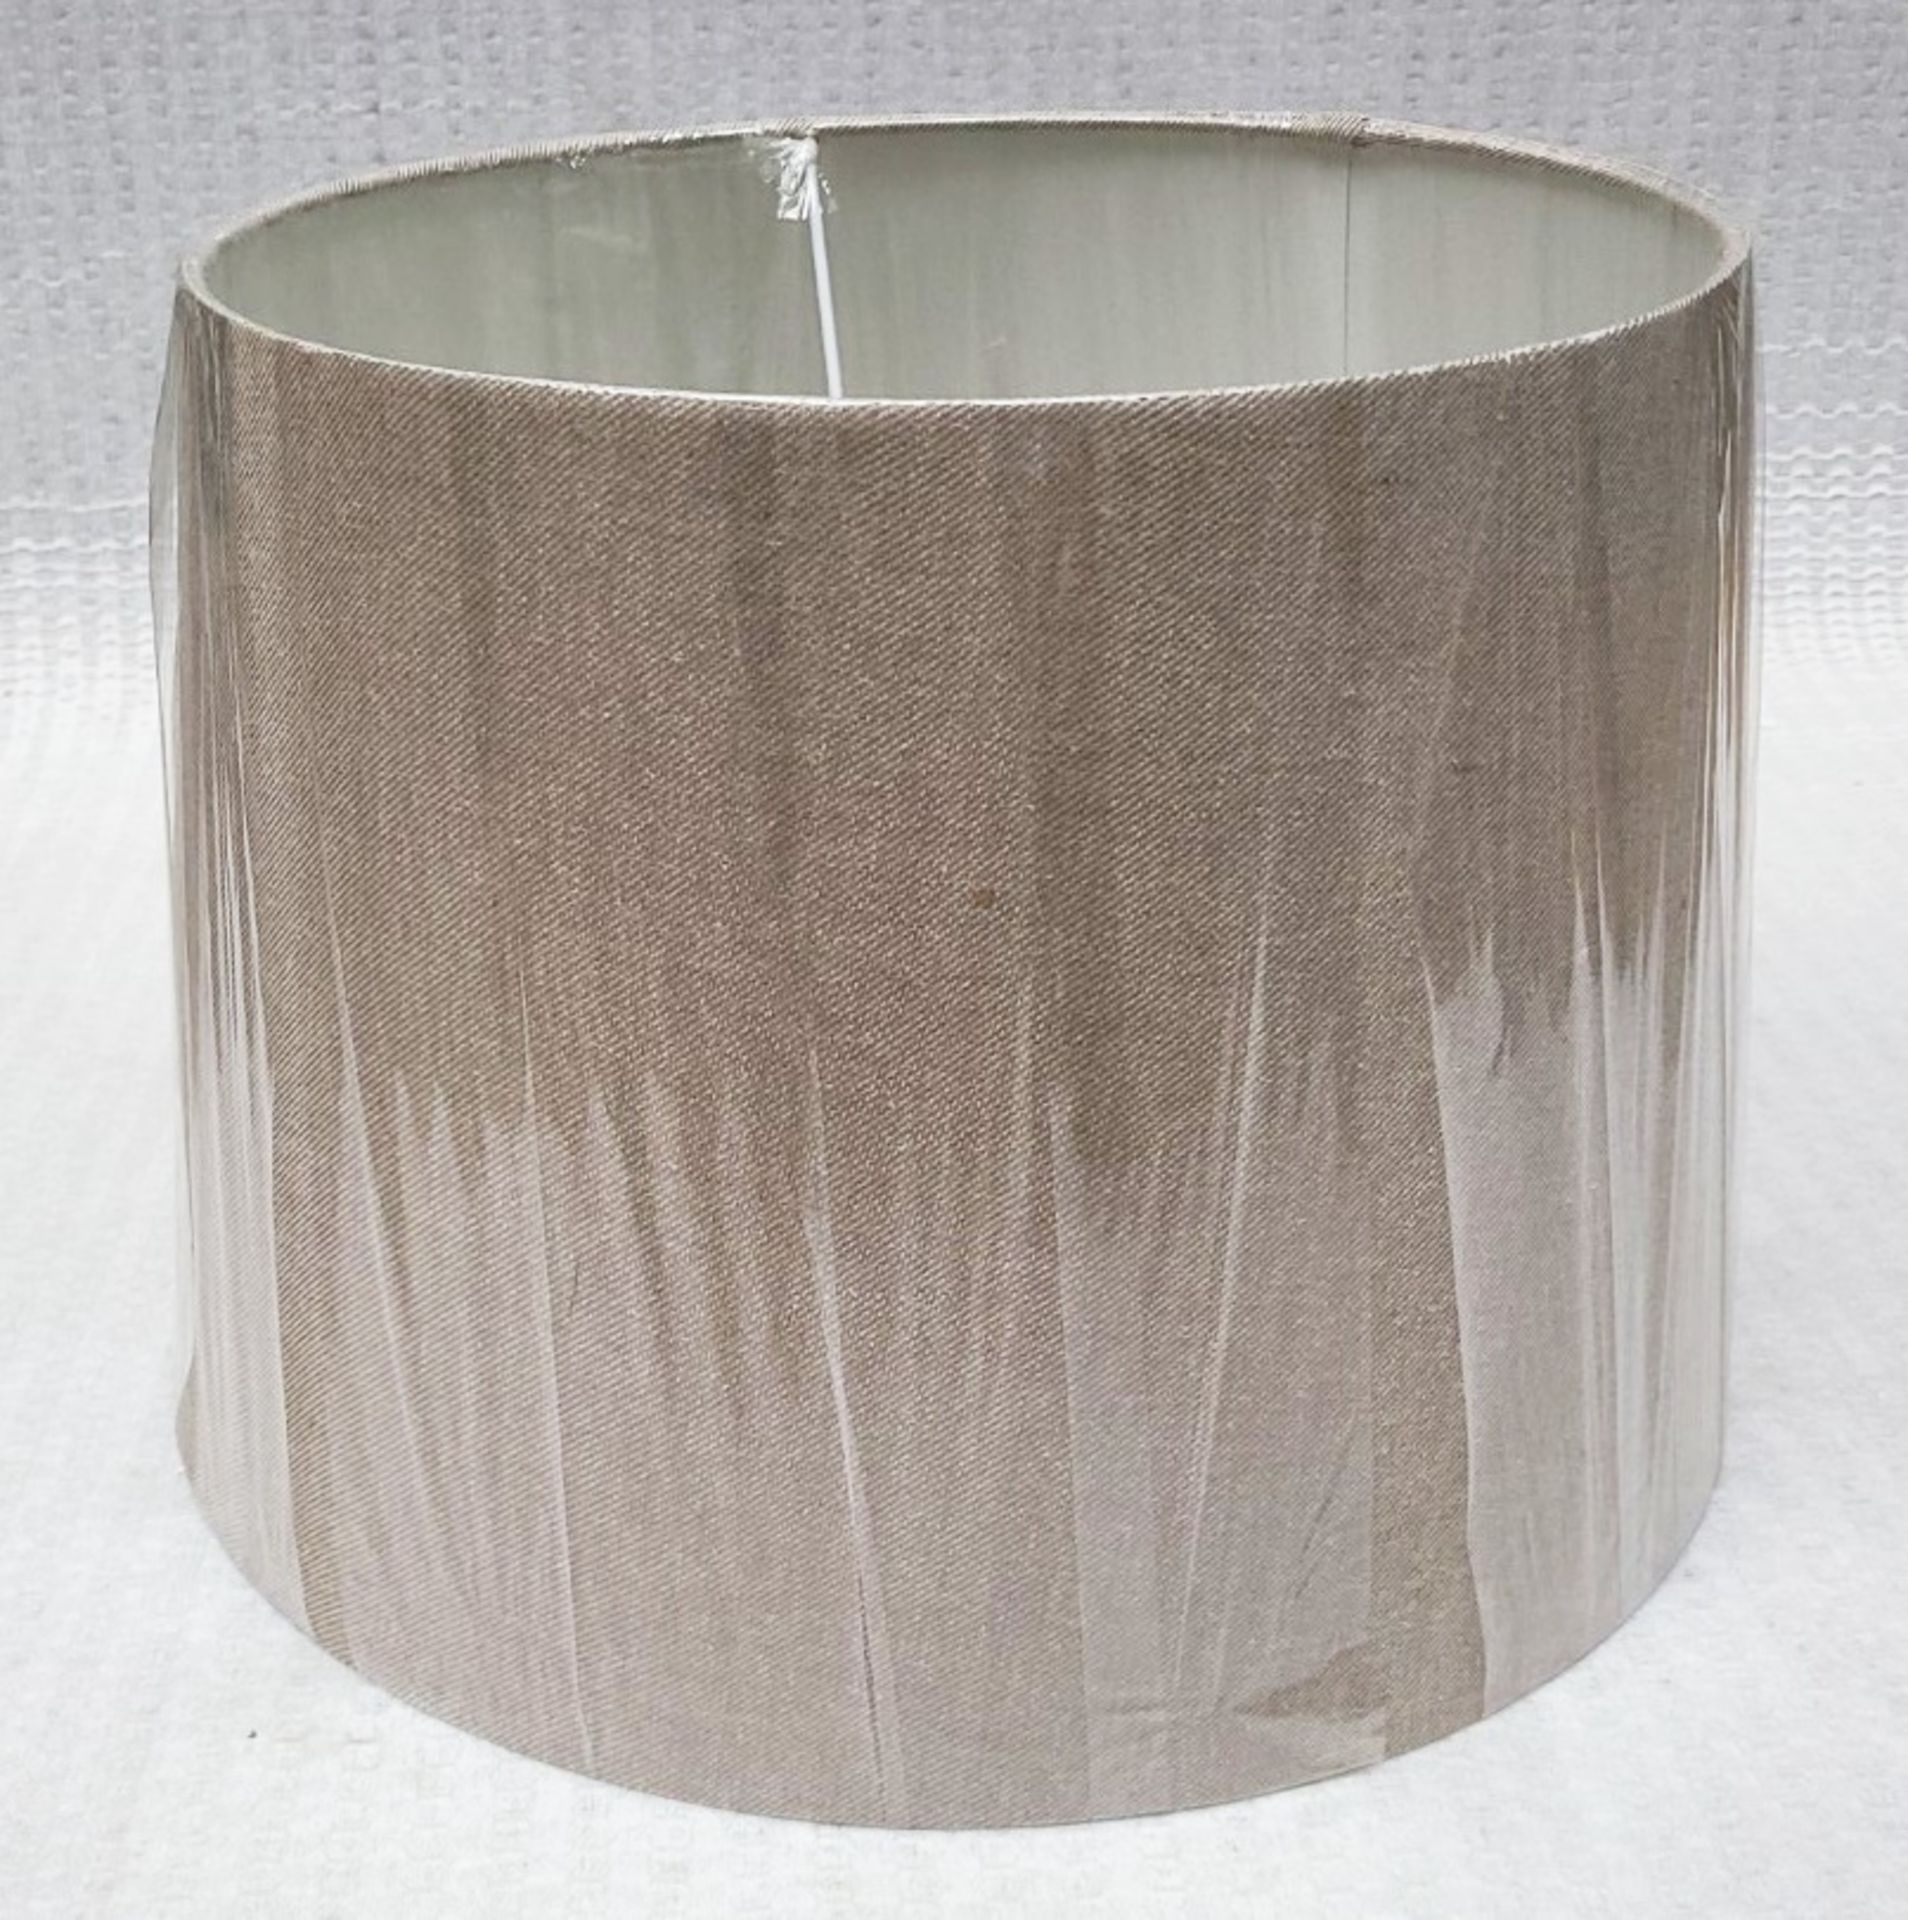 1 x CHELSOM Stone Linen French Drum Lamp Shade 28 x 40cm